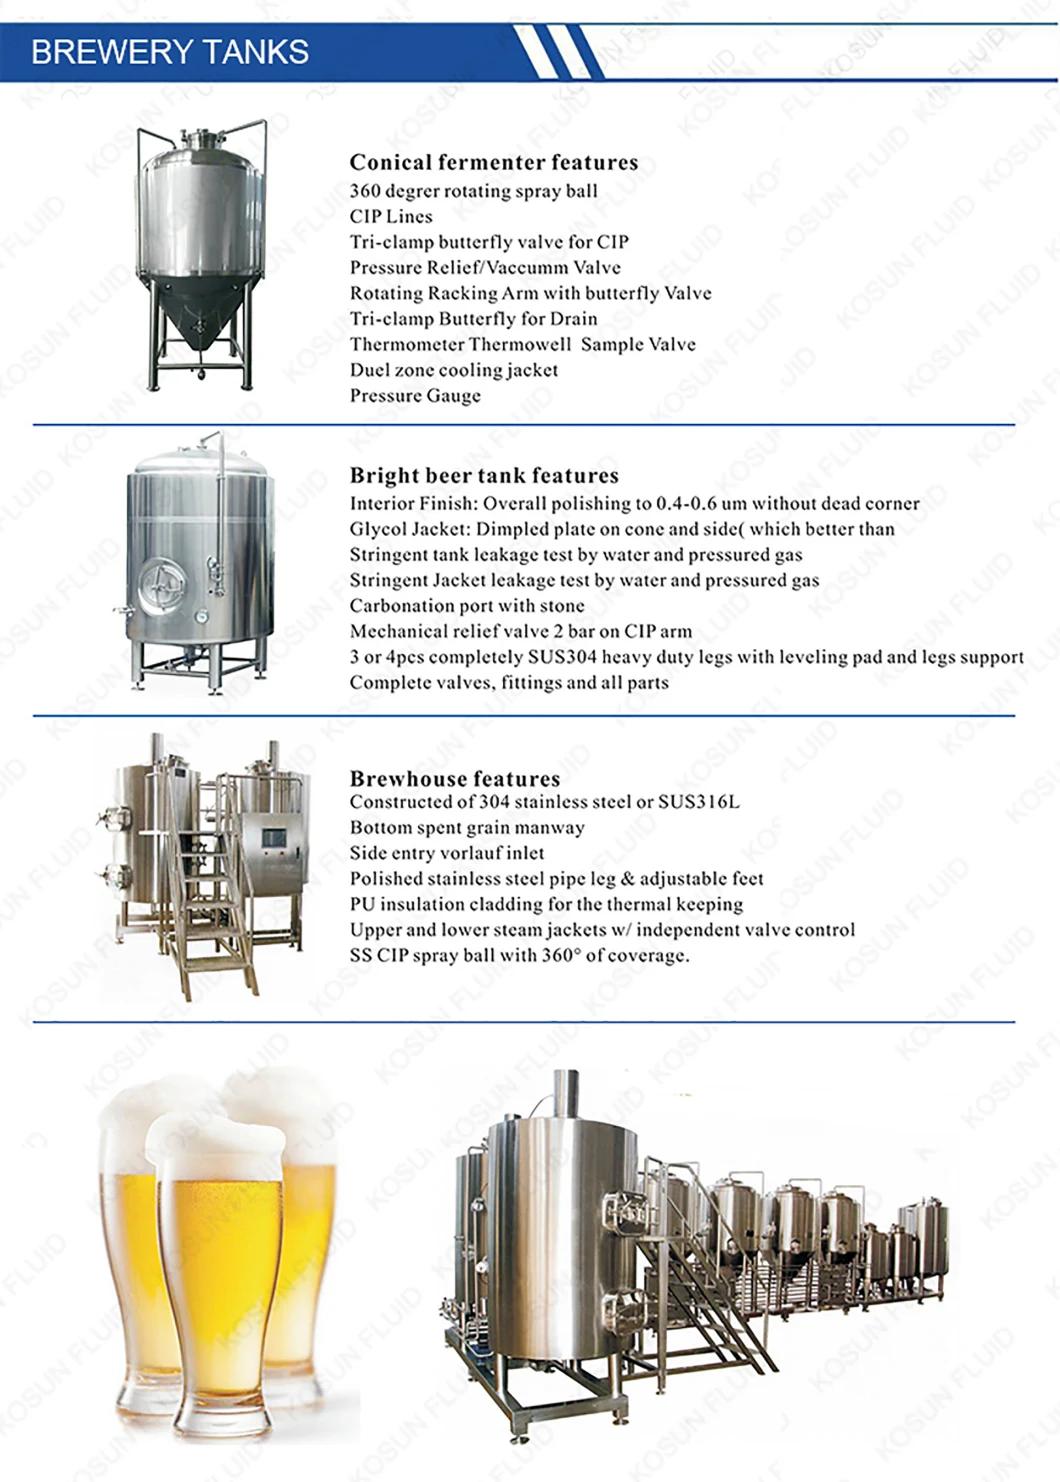 200L 500L 1bbl 3bbl 7bbl Liter Beer Brewery Equipment Brewhouse